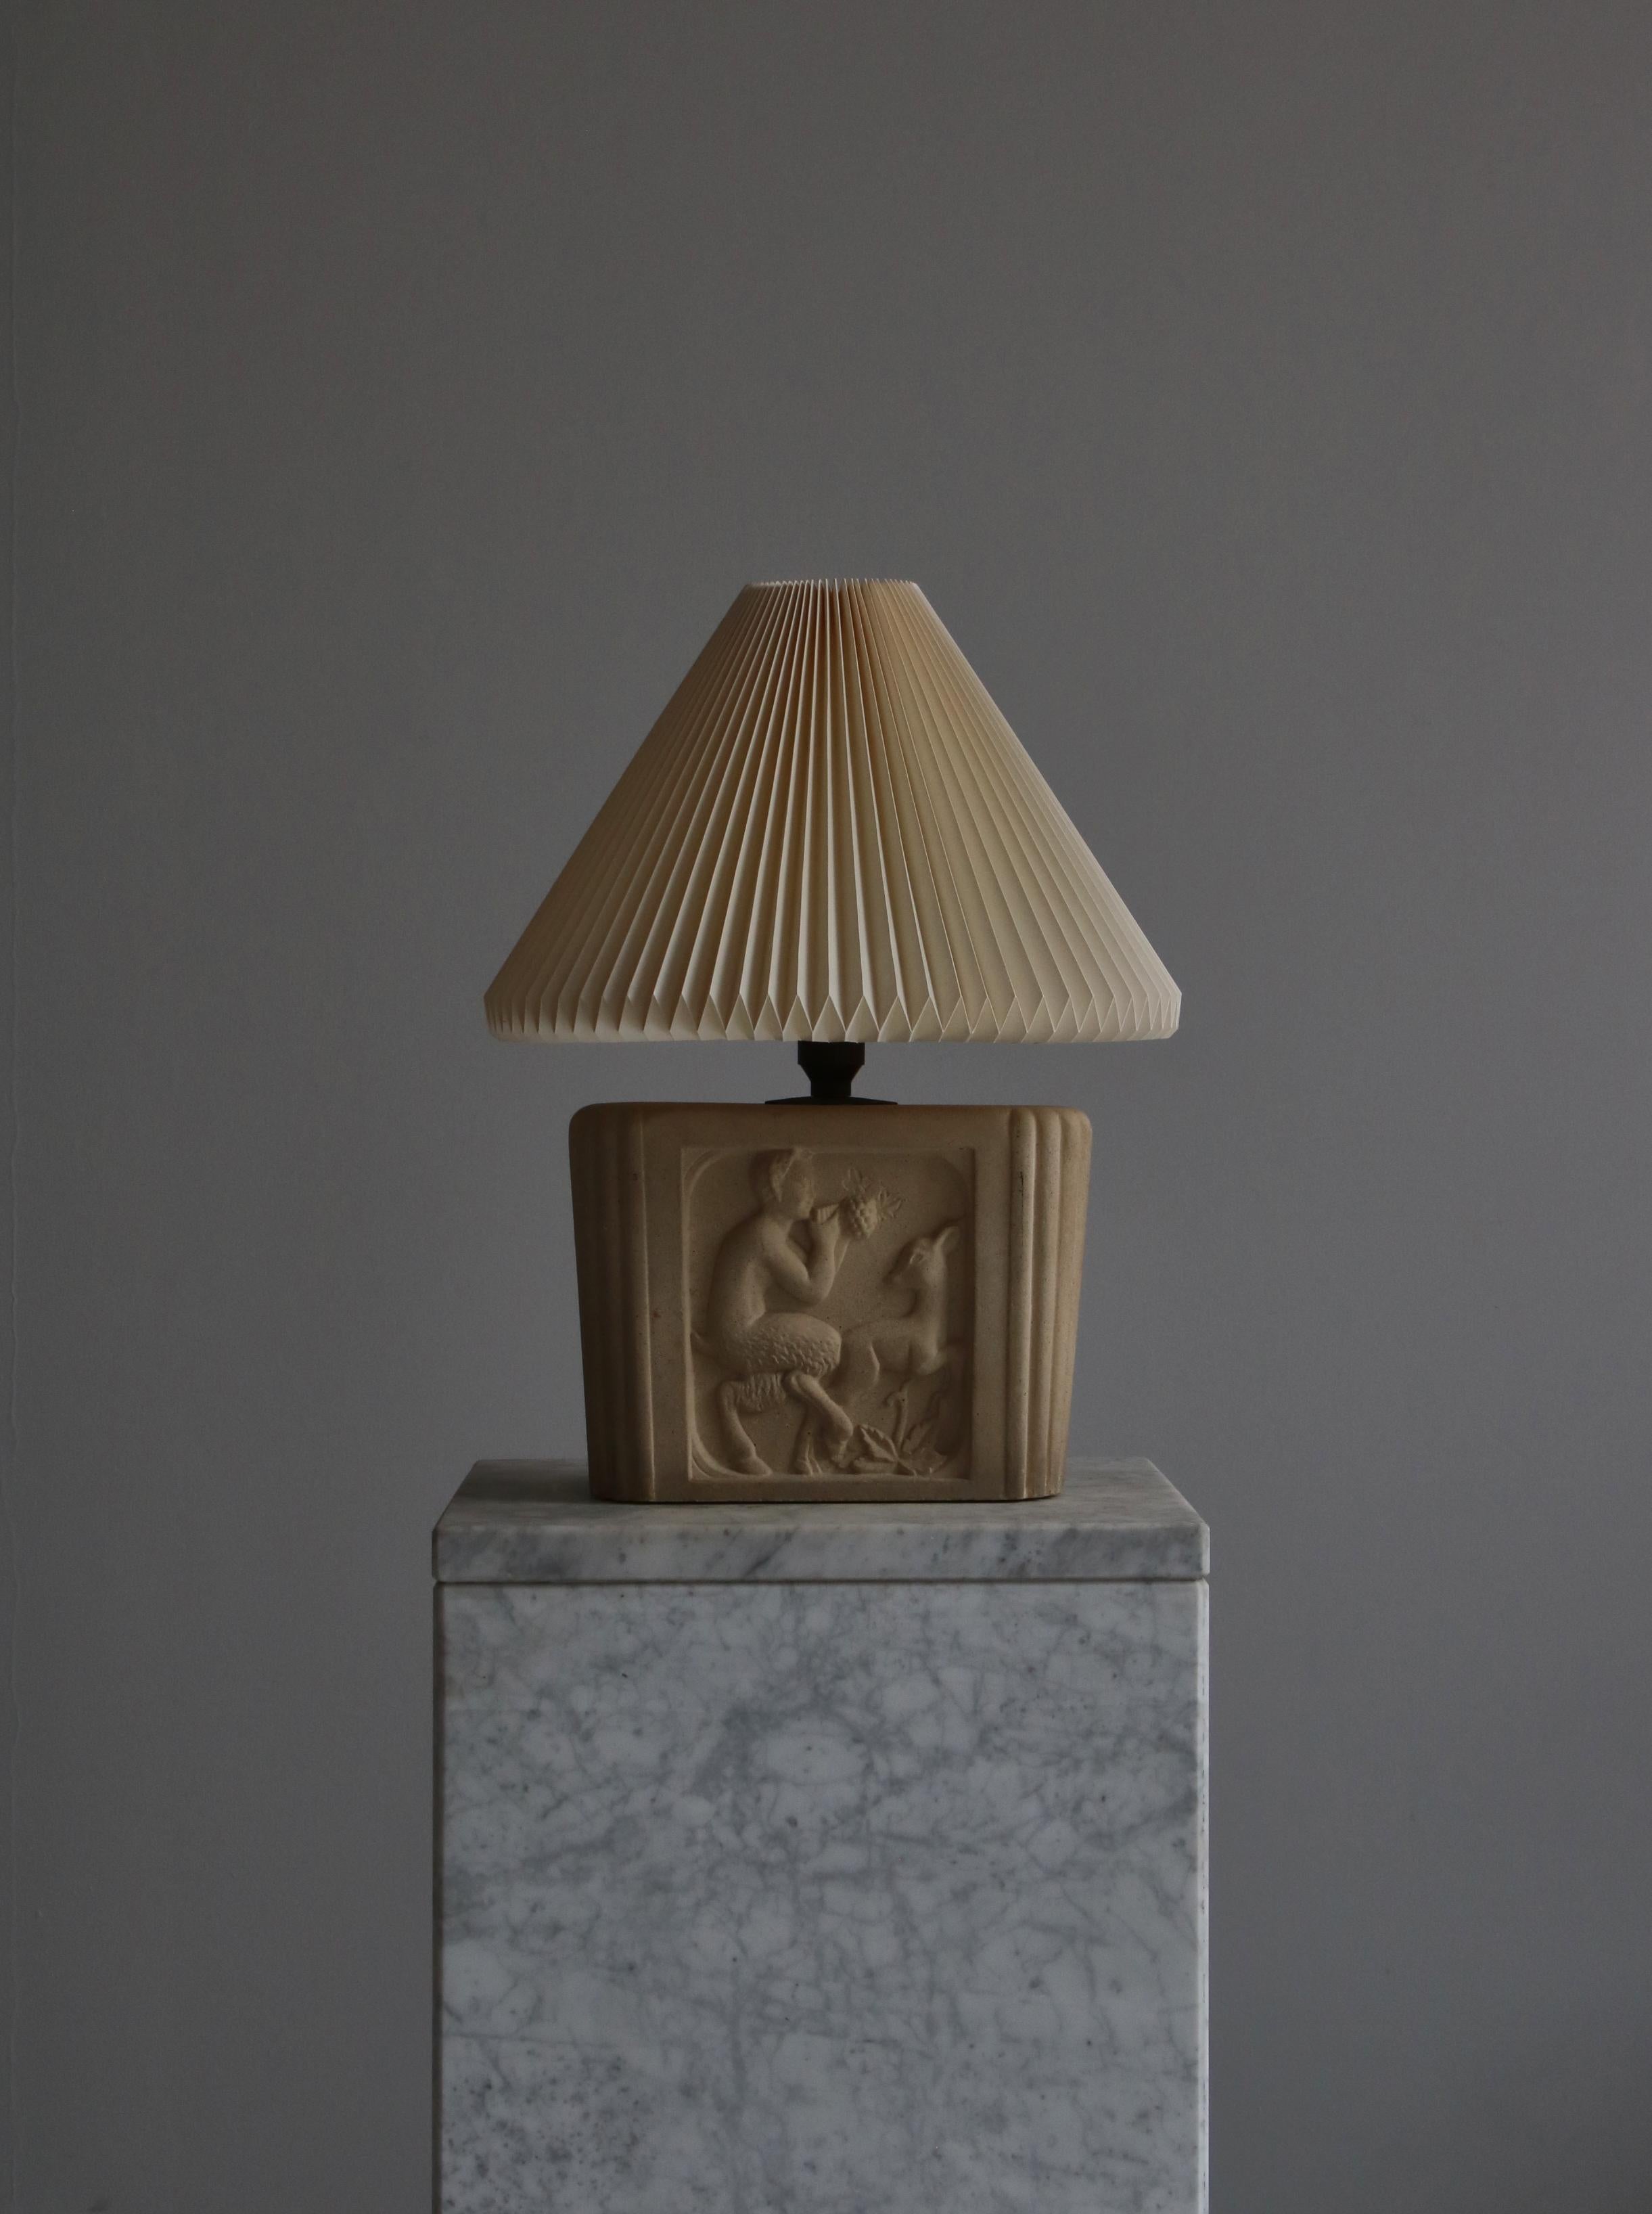 Sculptural art nouveau table lamp made in Denmark in the 1930s and sold in 